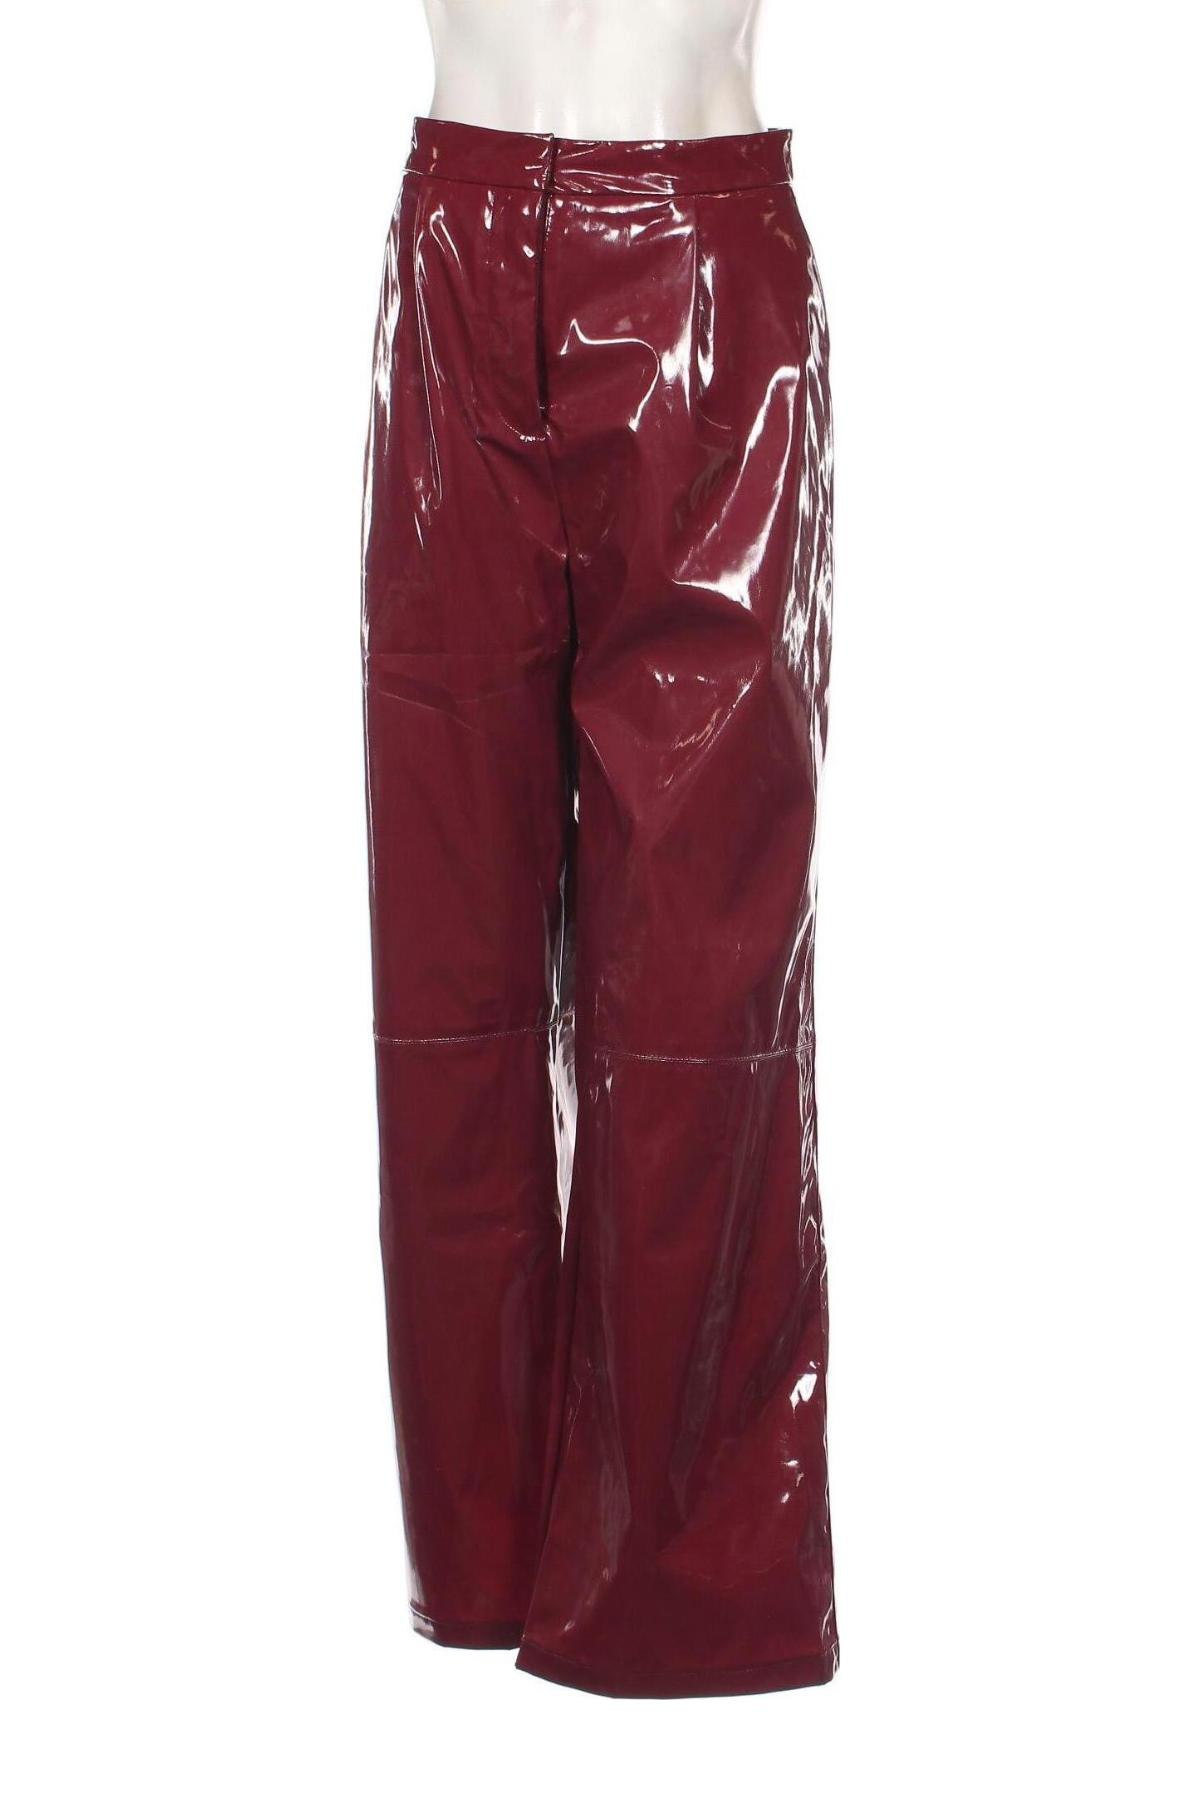 Damenhose Katy Perry exclusive for ABOUT YOU, Größe M, Farbe Rot, Preis € 21,57